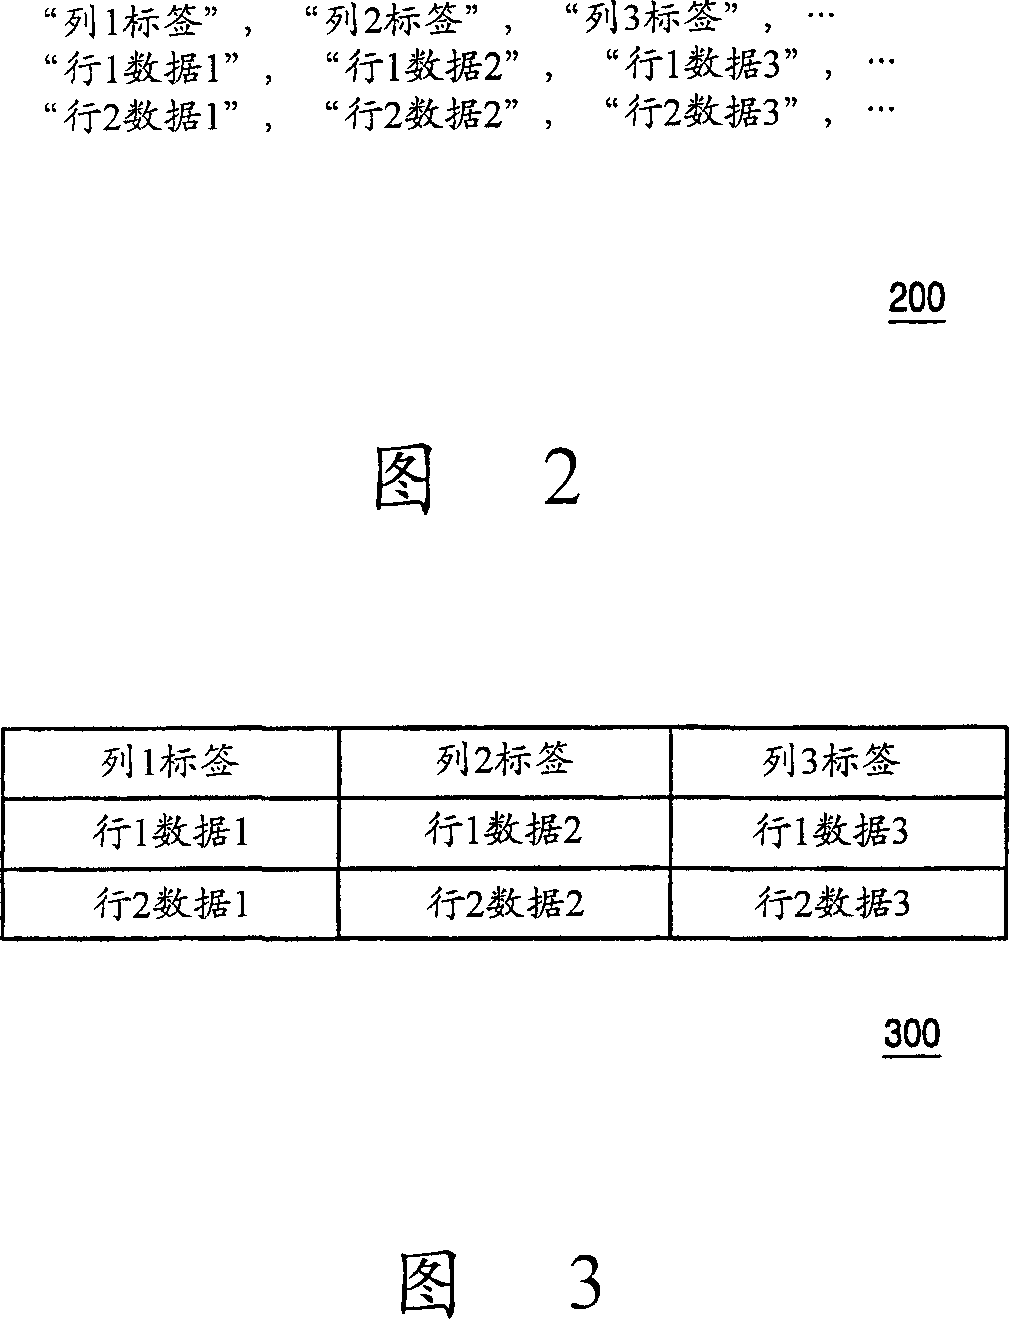 Shared address data service for personal CE apparatus